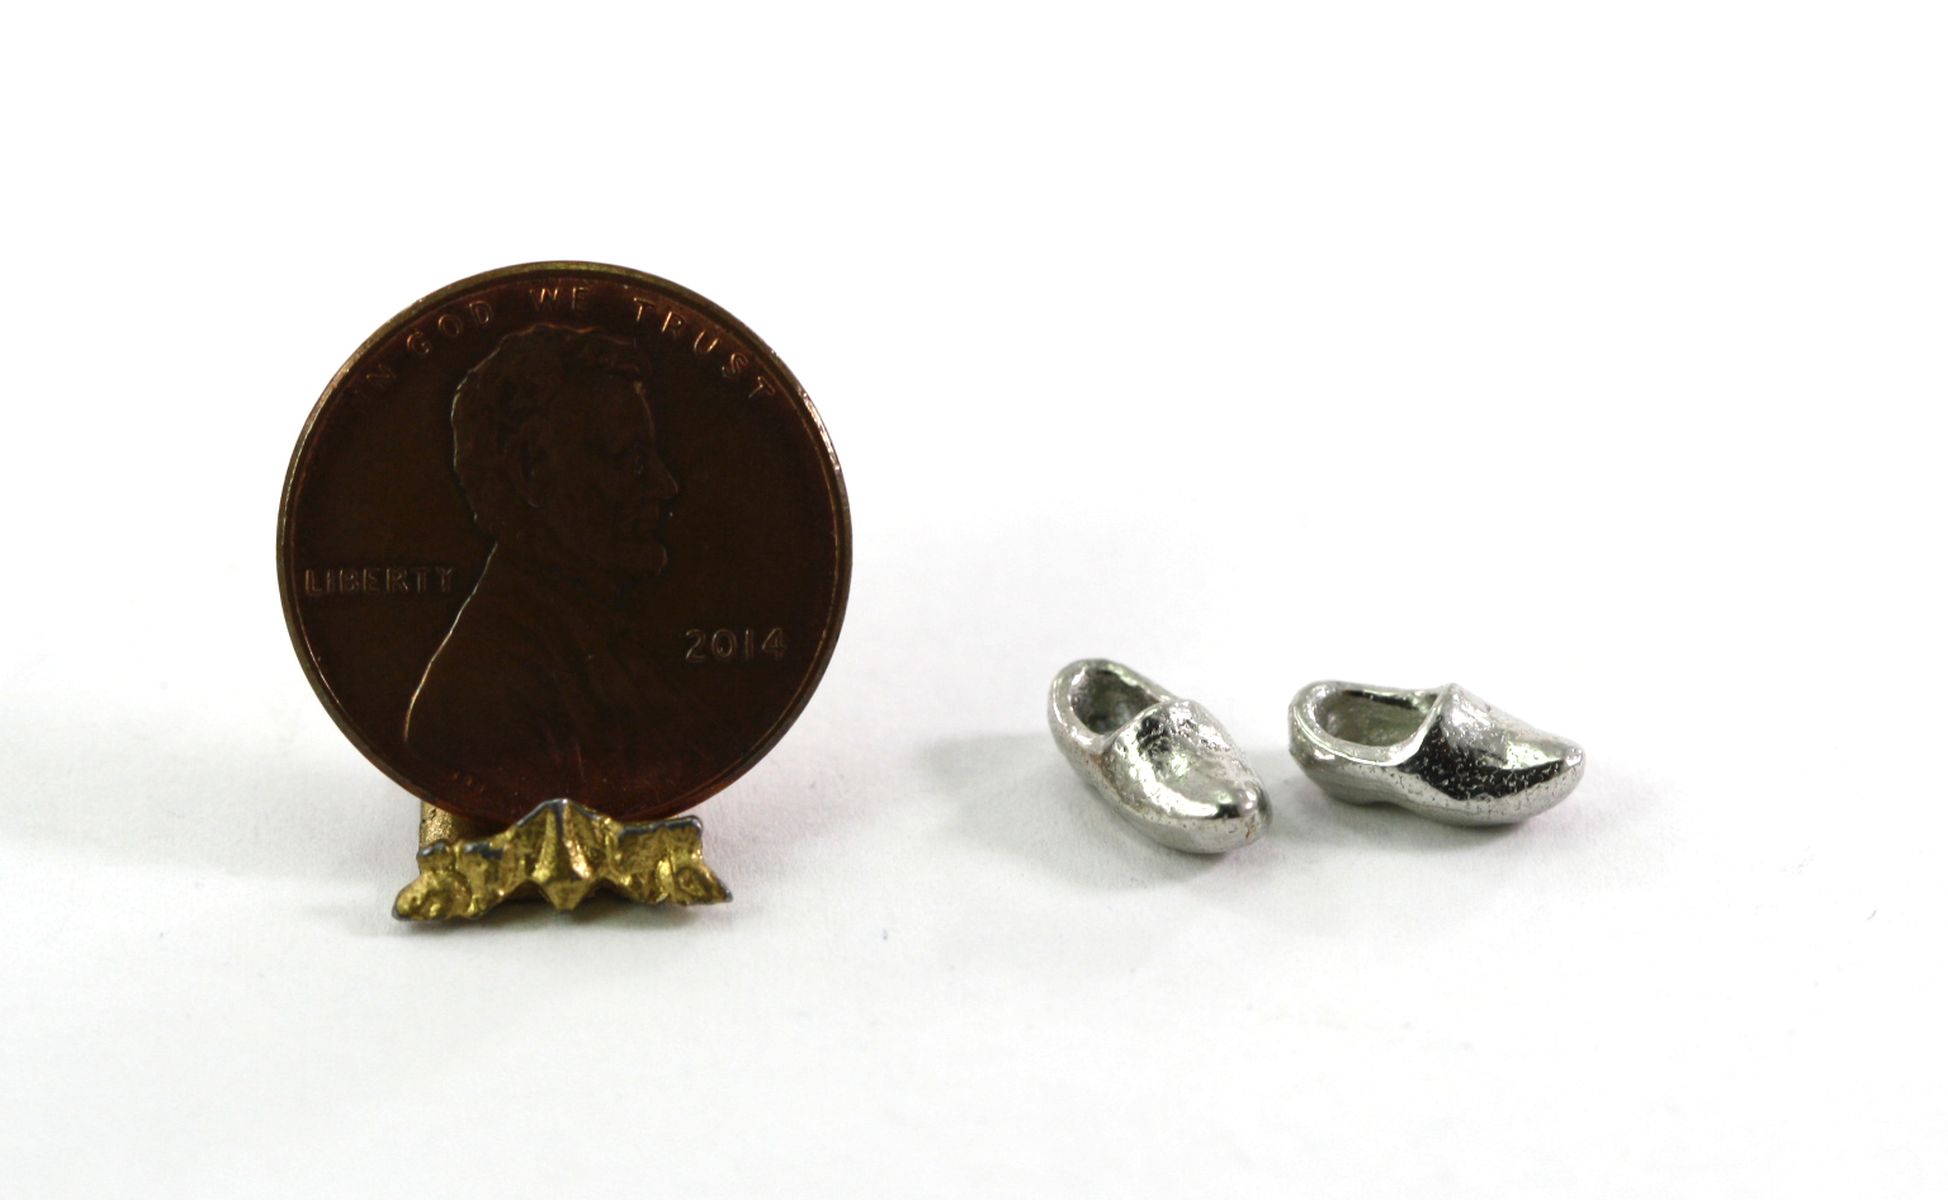 Pair of Clogs in Polished Pewter 1:24 Scale by Warwick Miniatures